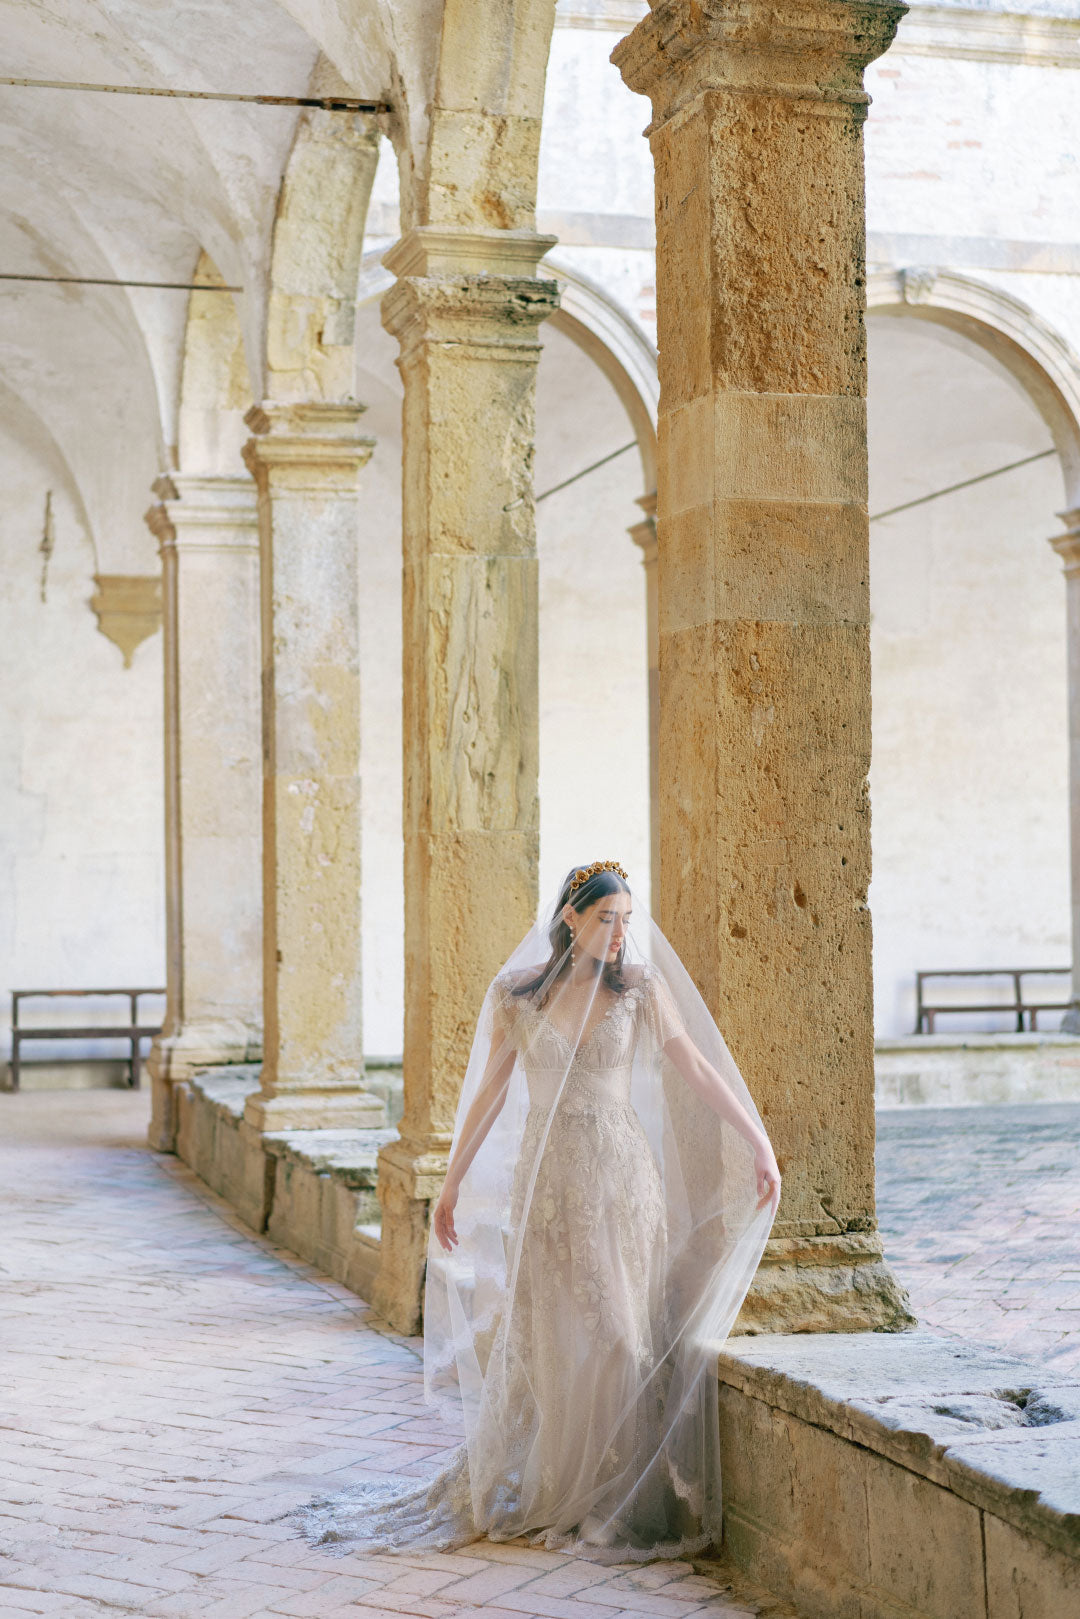 Bride in Soleil and Eloquence Veil by Claire Pettibone